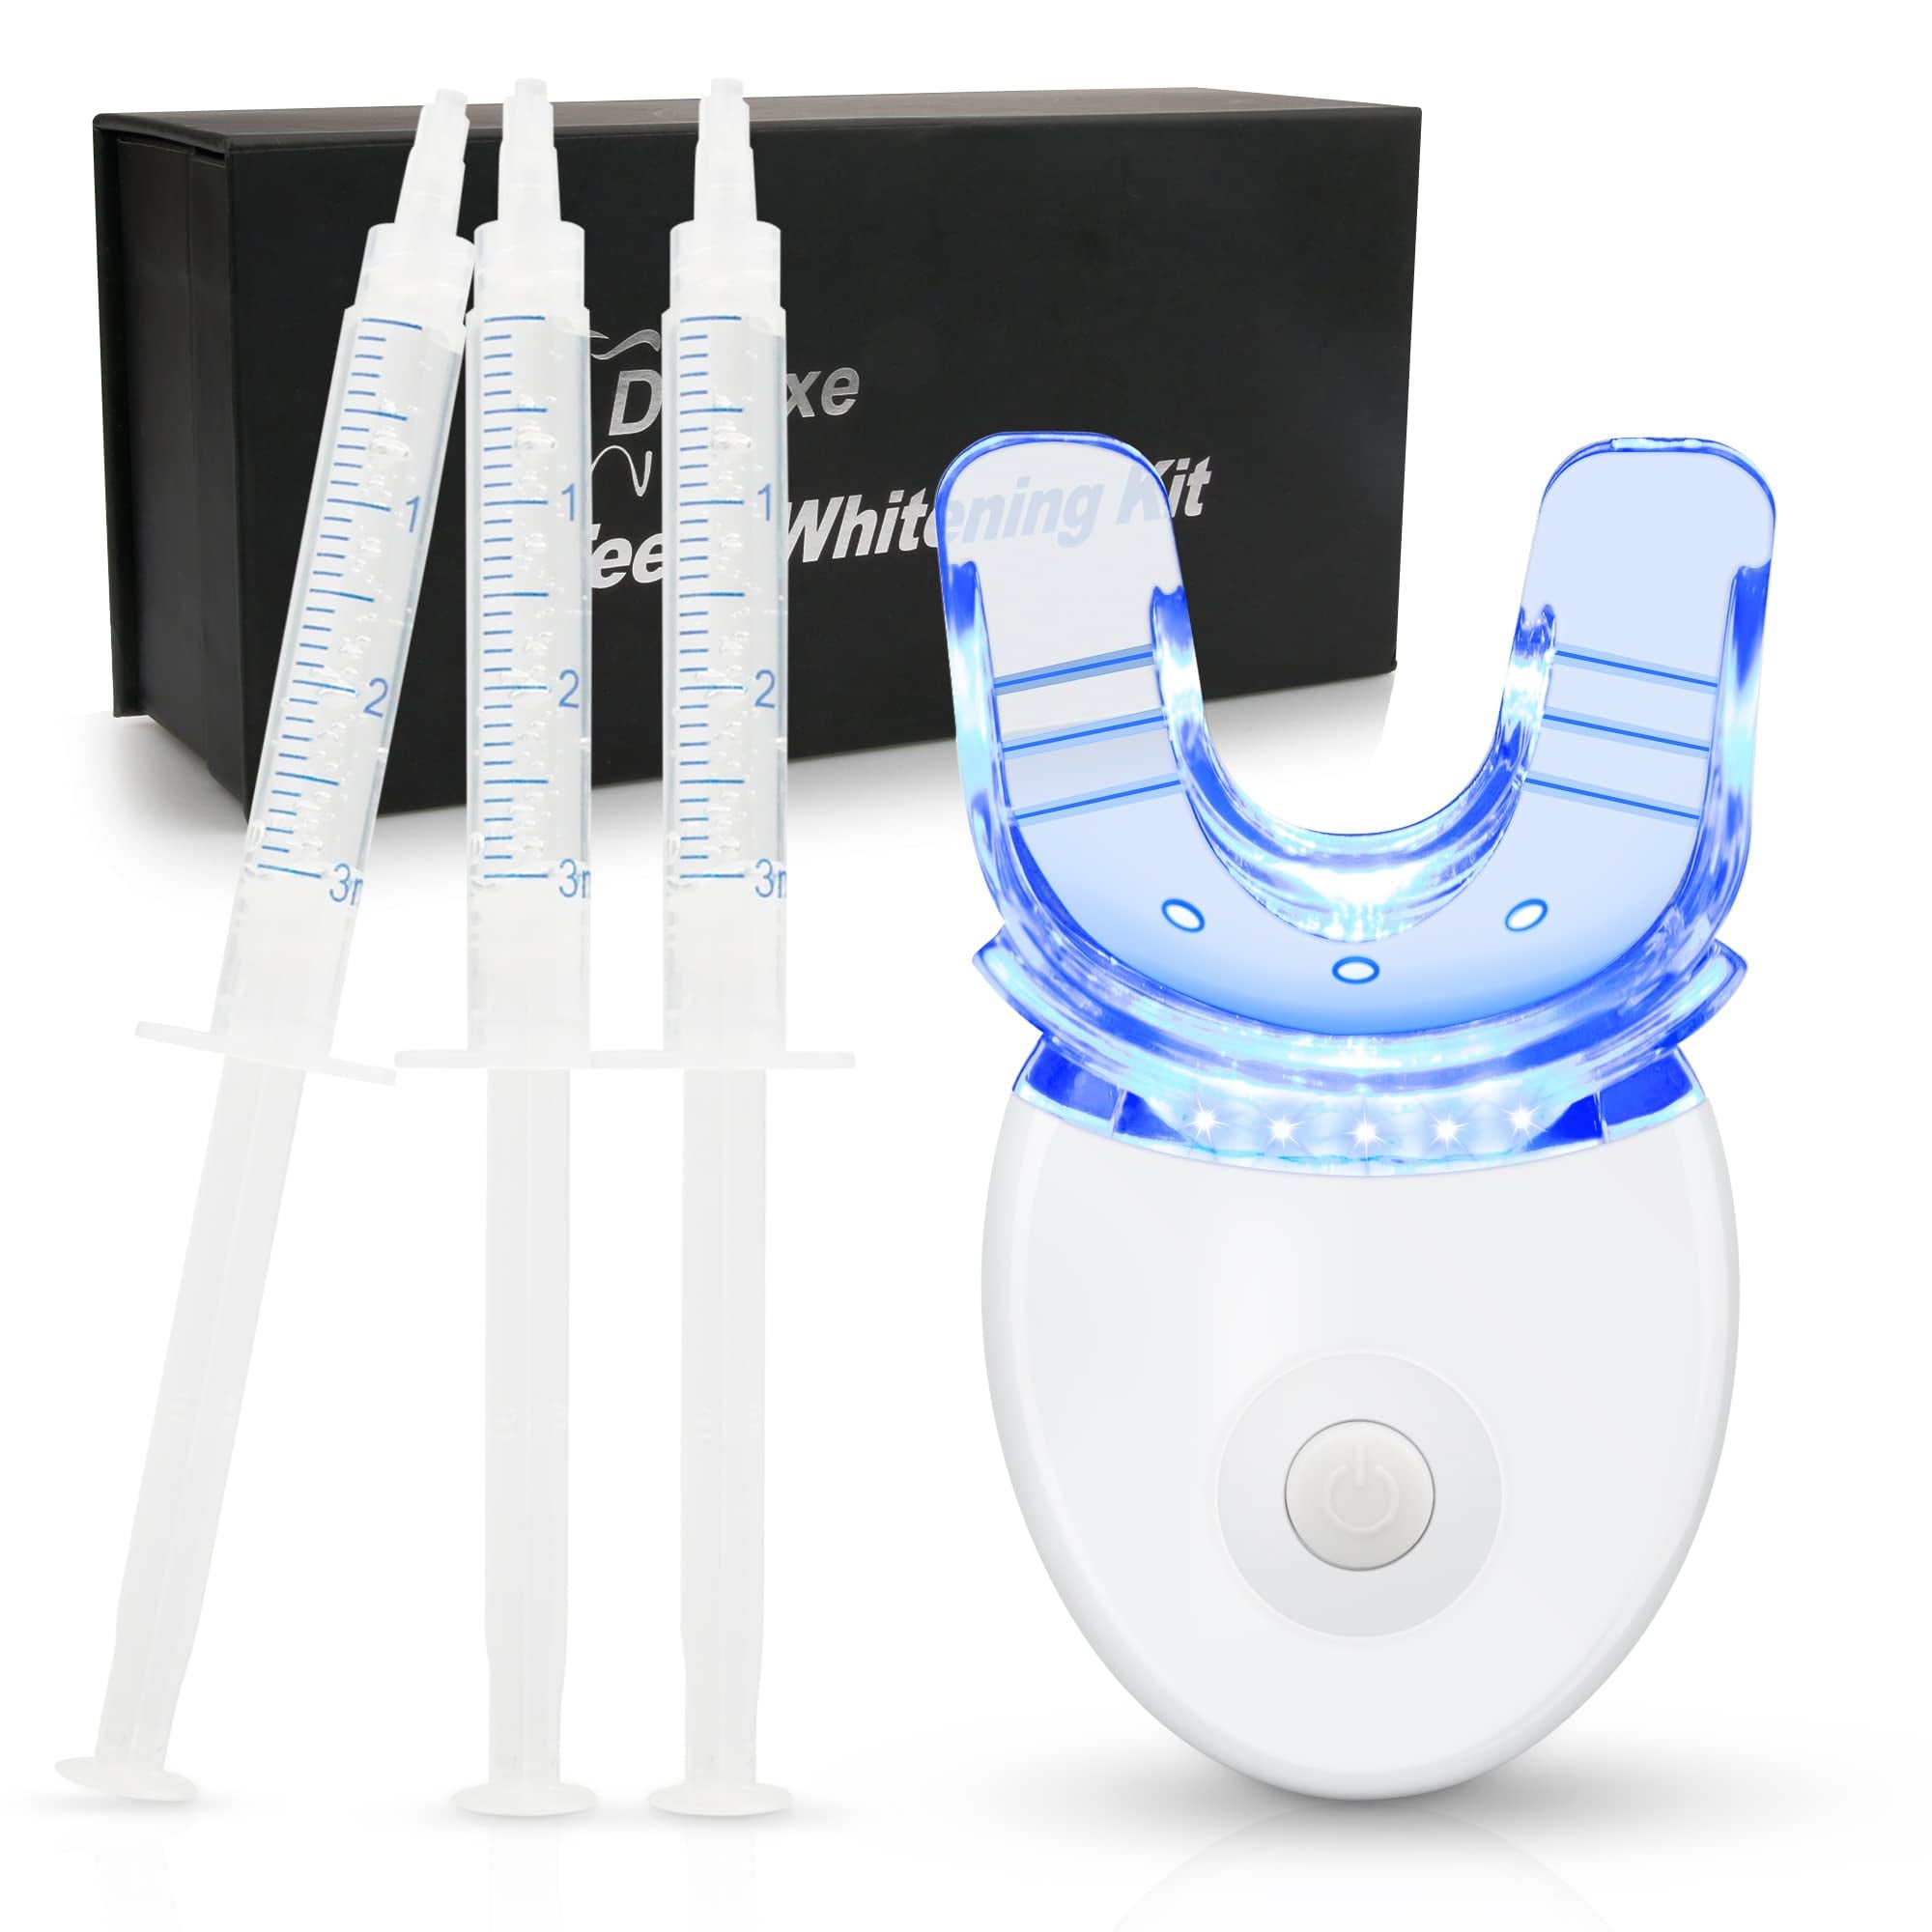 Suerbeaty Teeth Whitening Kit with Light, Professional Teeth Whitener with 3 Whitening Gel, Mouth Tray, 15 Minutes Effective Home Tooth Whitening